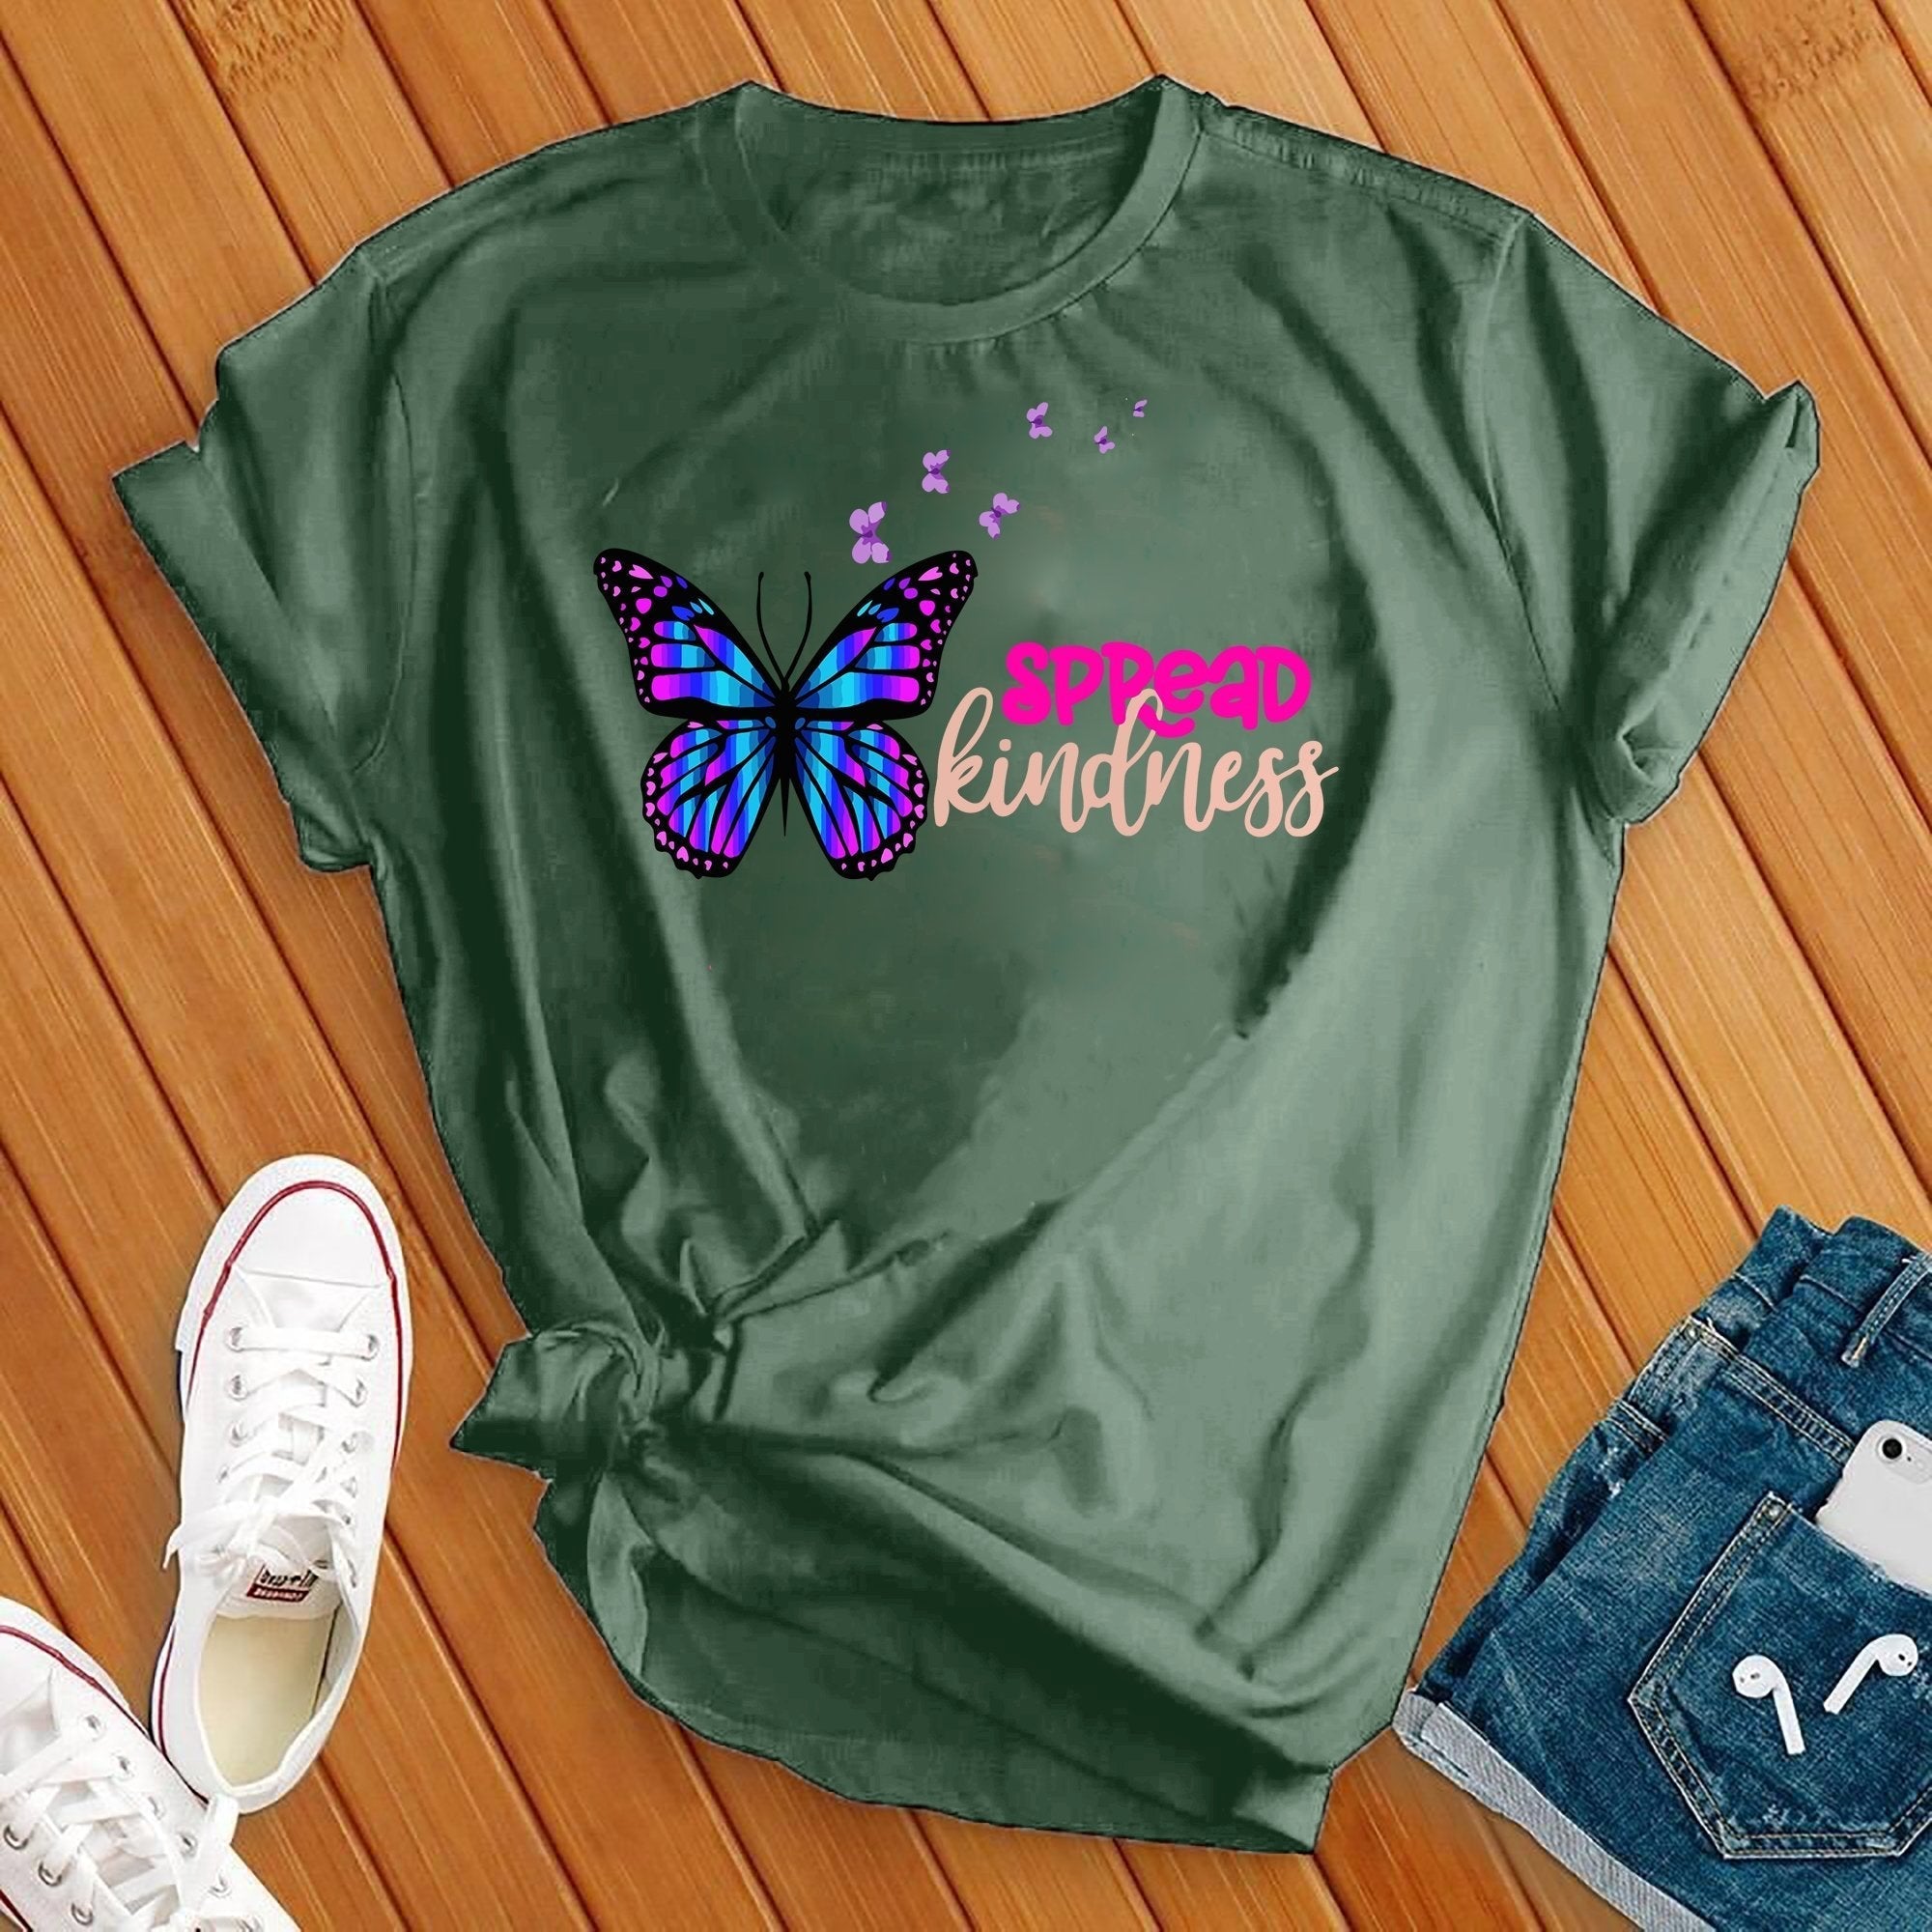 Spread Kindness Butterfly's Tee - Love Tees